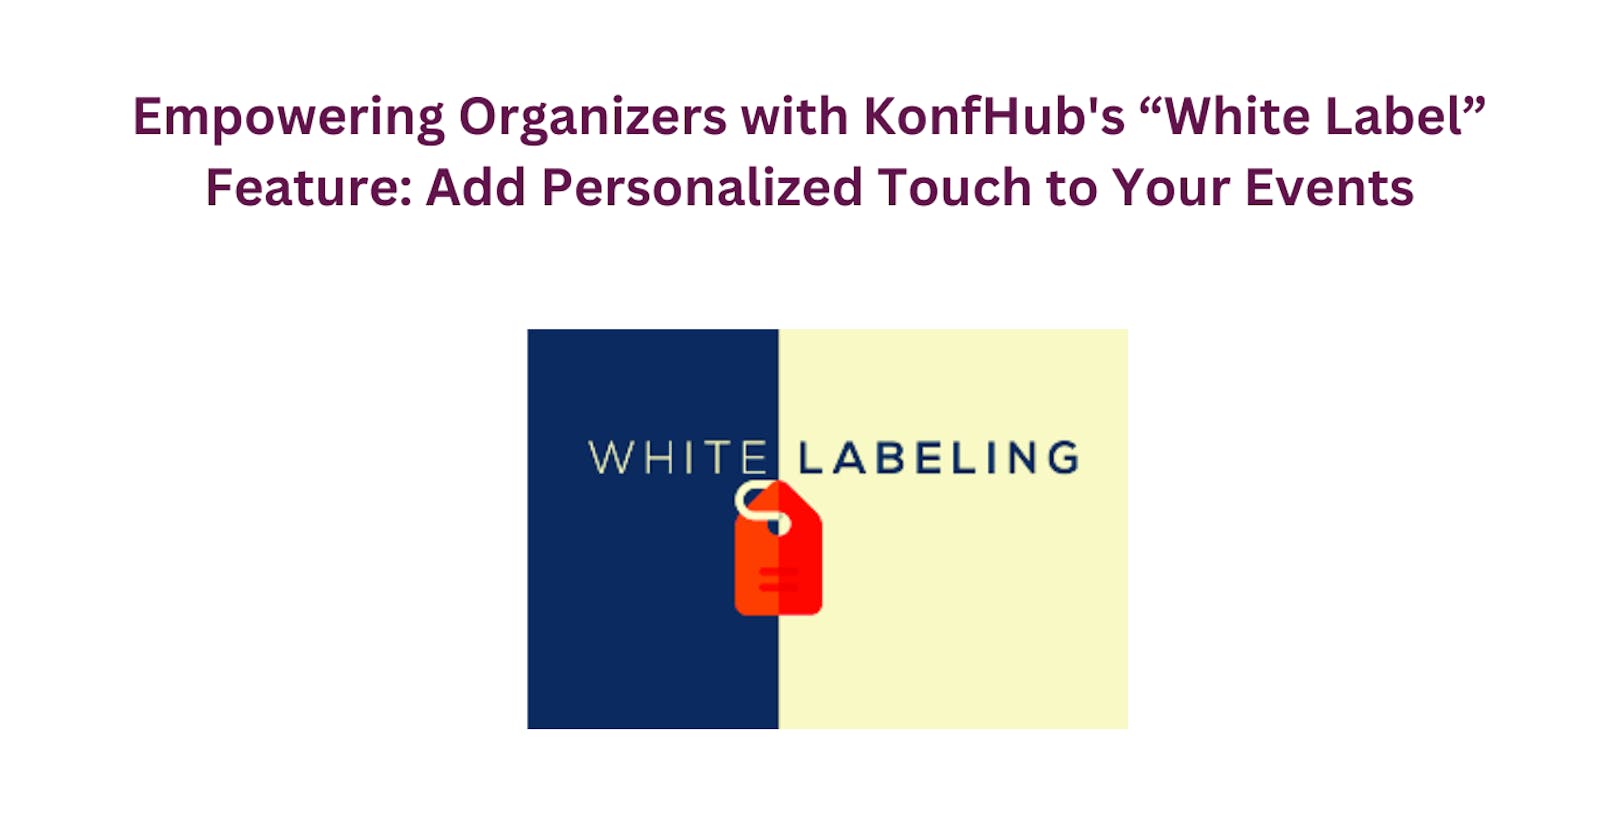 Empowering Event Organizers with KonfHub's White Label Feature: A Personalized Touch to Your Events